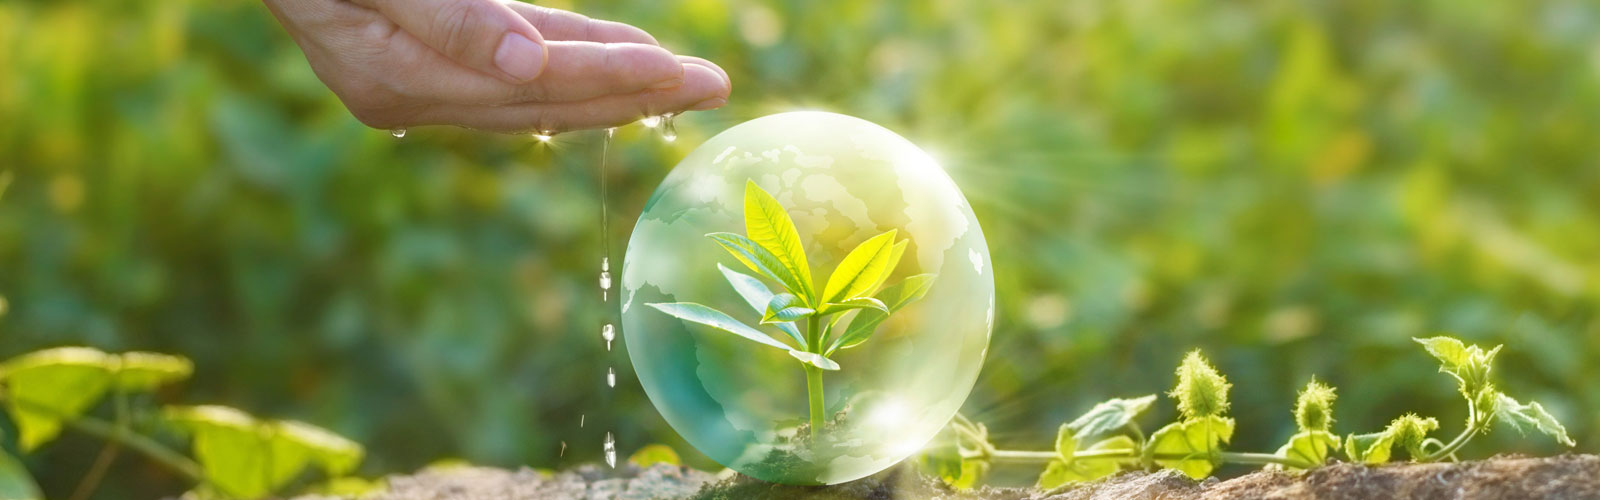 Hand and plant in a water bubble and hand